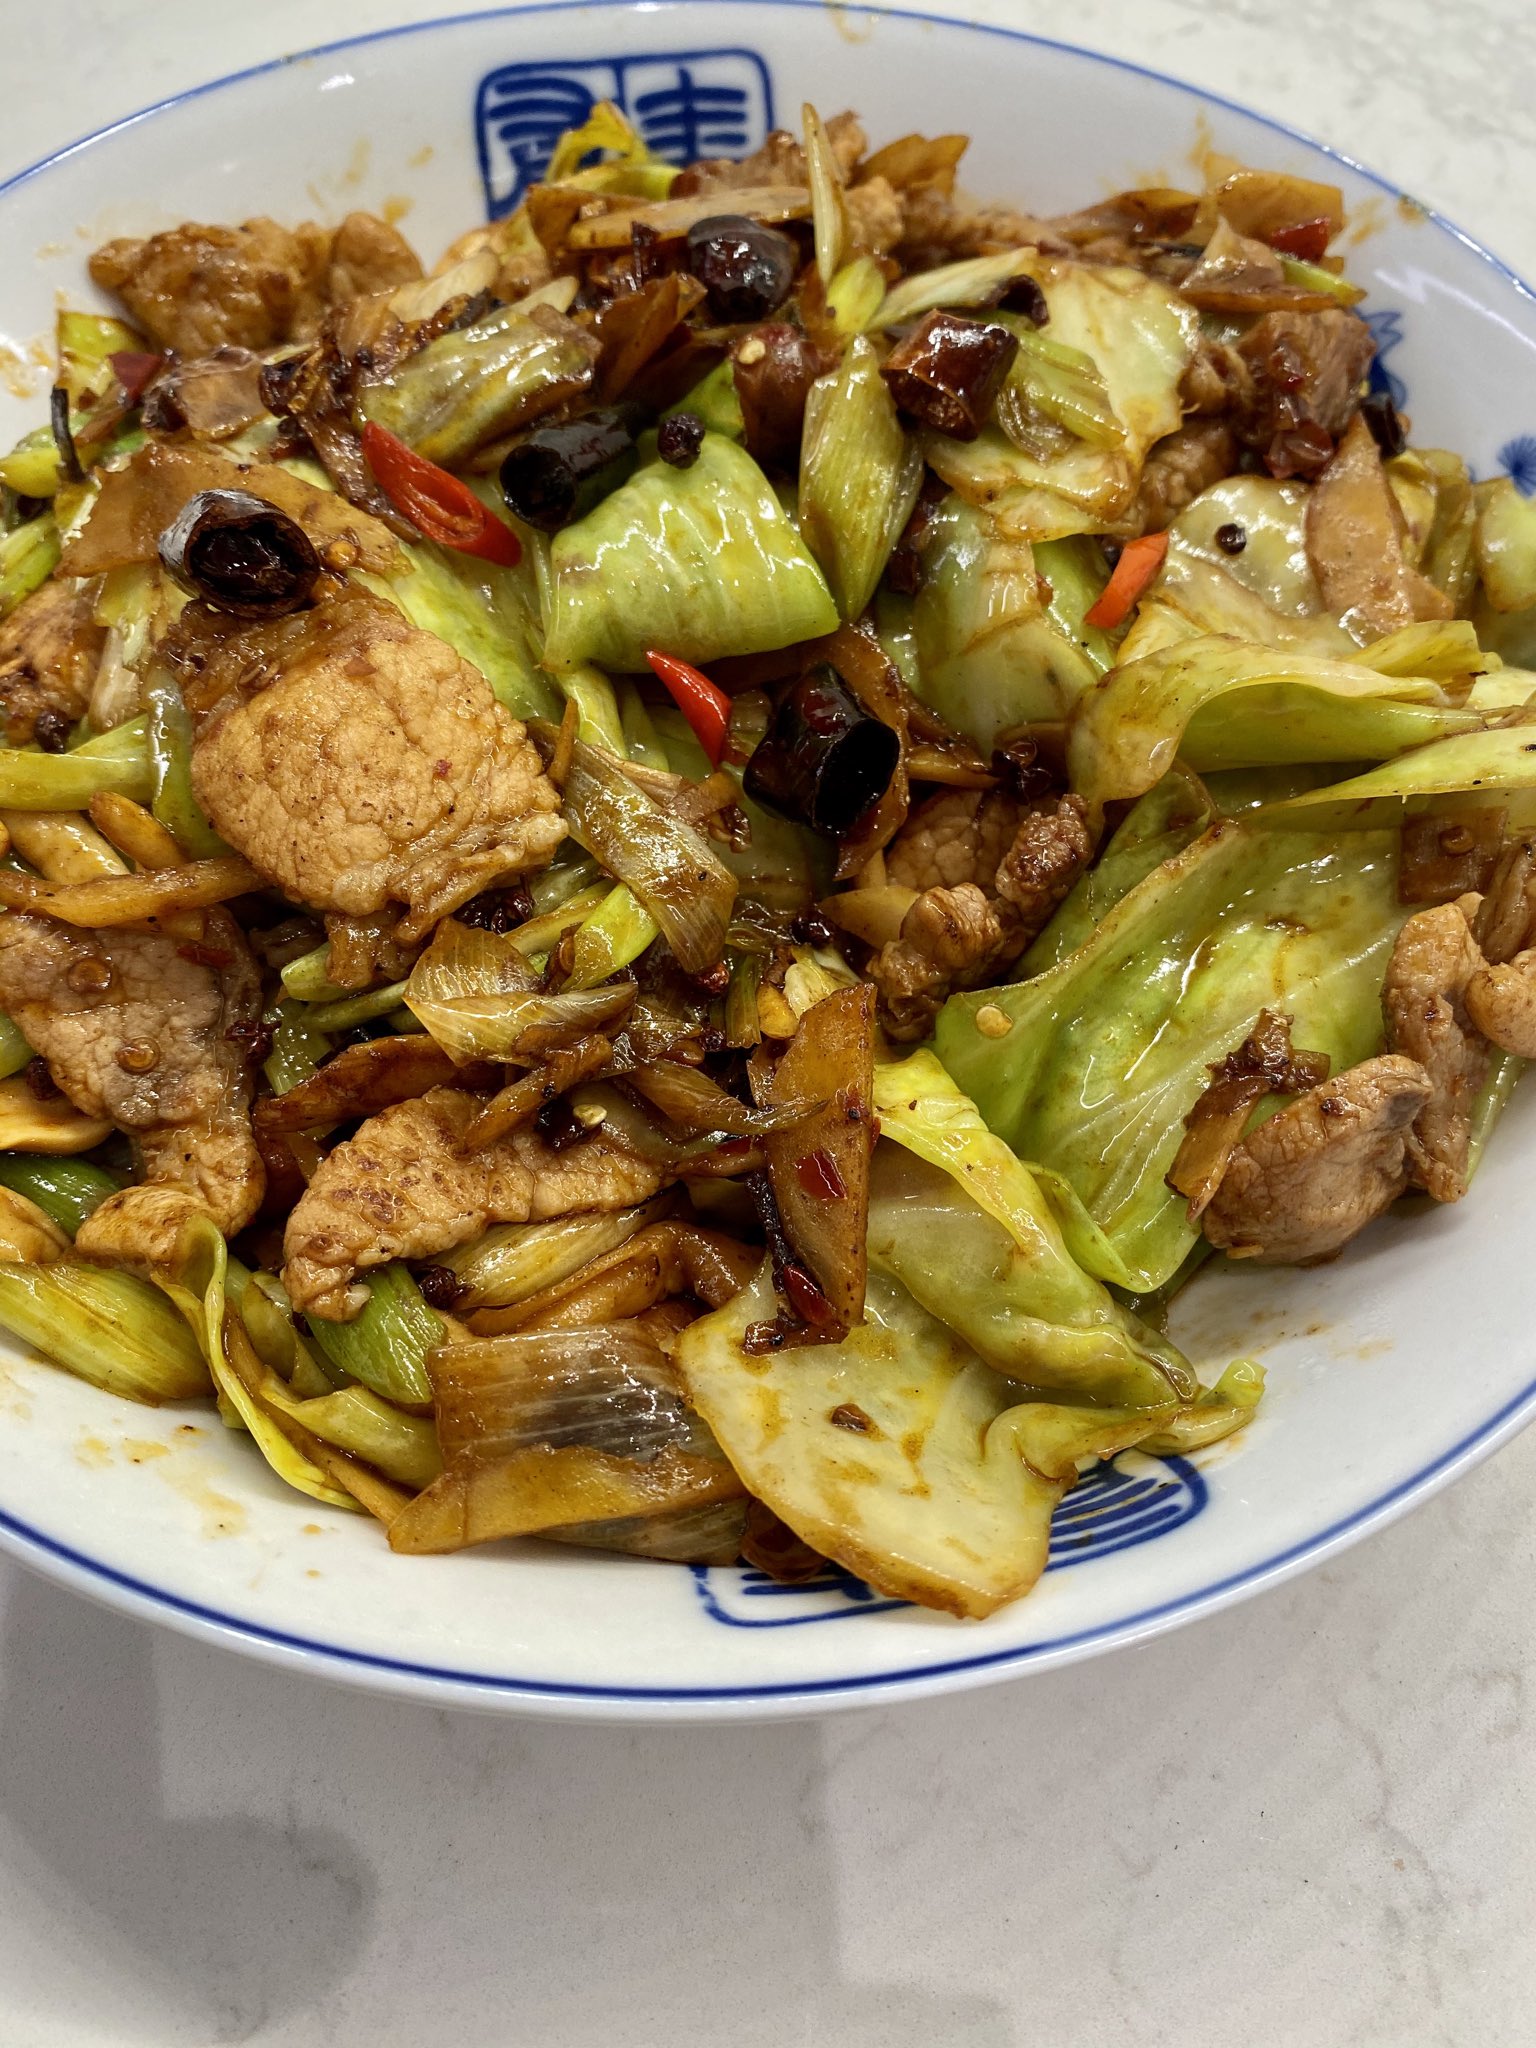 Robert Lax Sichuan Pork Belly And Cabbage Dry Pot Spicy And Numbing With Dry And A Few Fresh Chilies Huajiao Peppercorns And Pixian Doubanjiang Fermented Bean Paste Sichuancooking Sichuanfood Chinesecooking